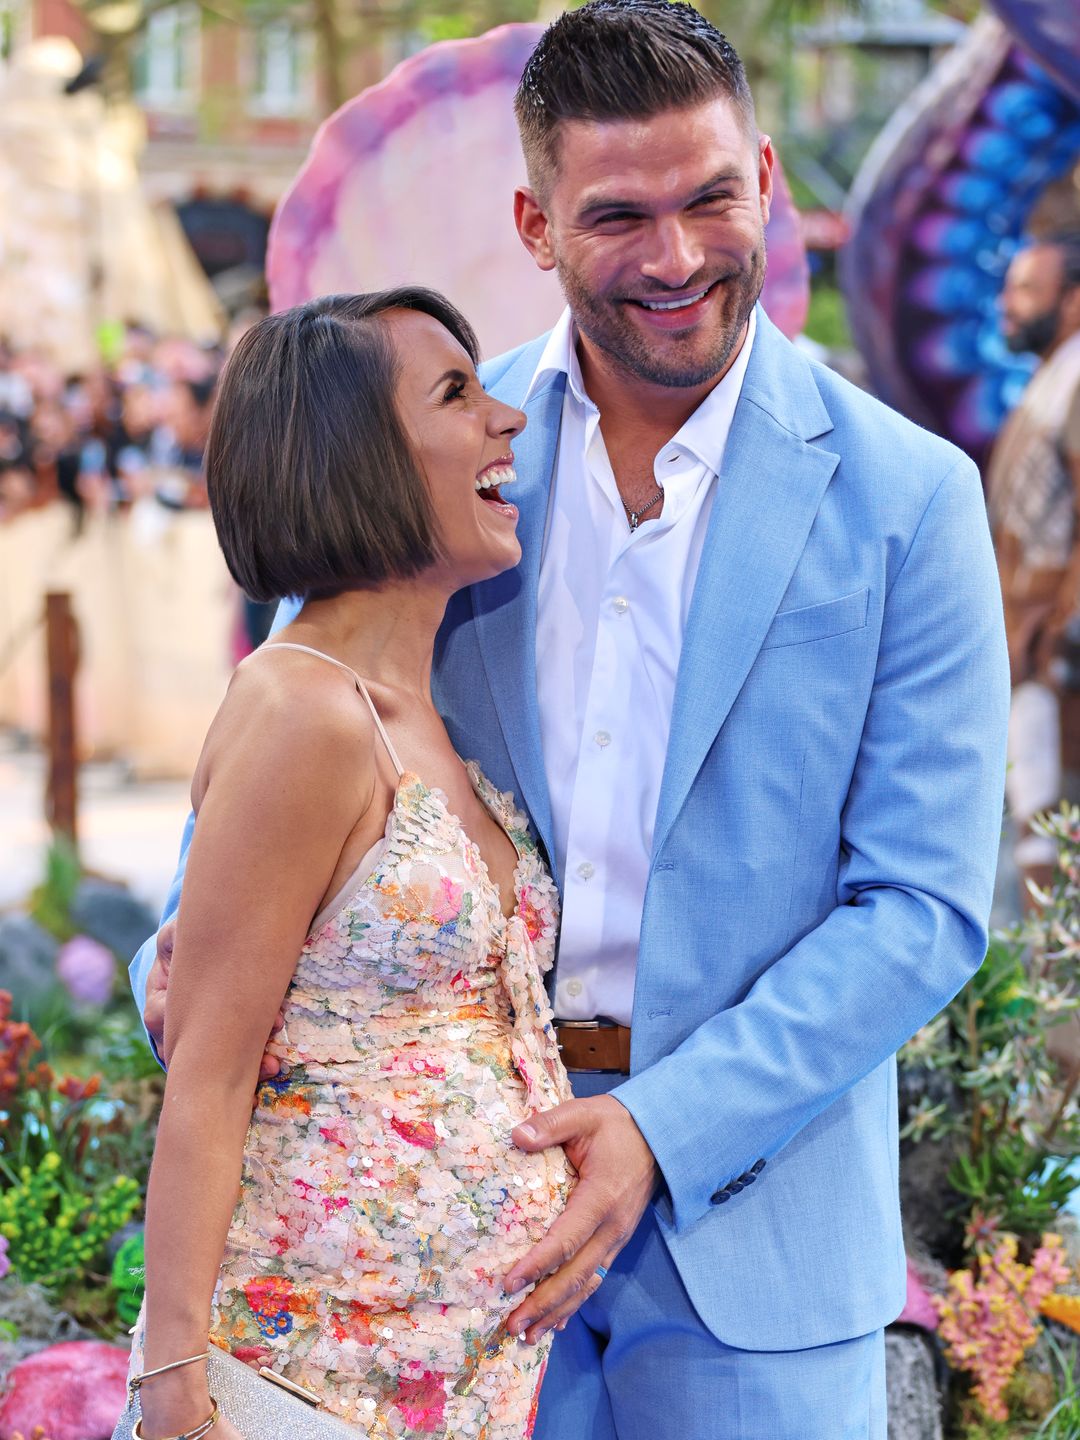 Janette and husband Aljaz Skorjanec are expecting their first child